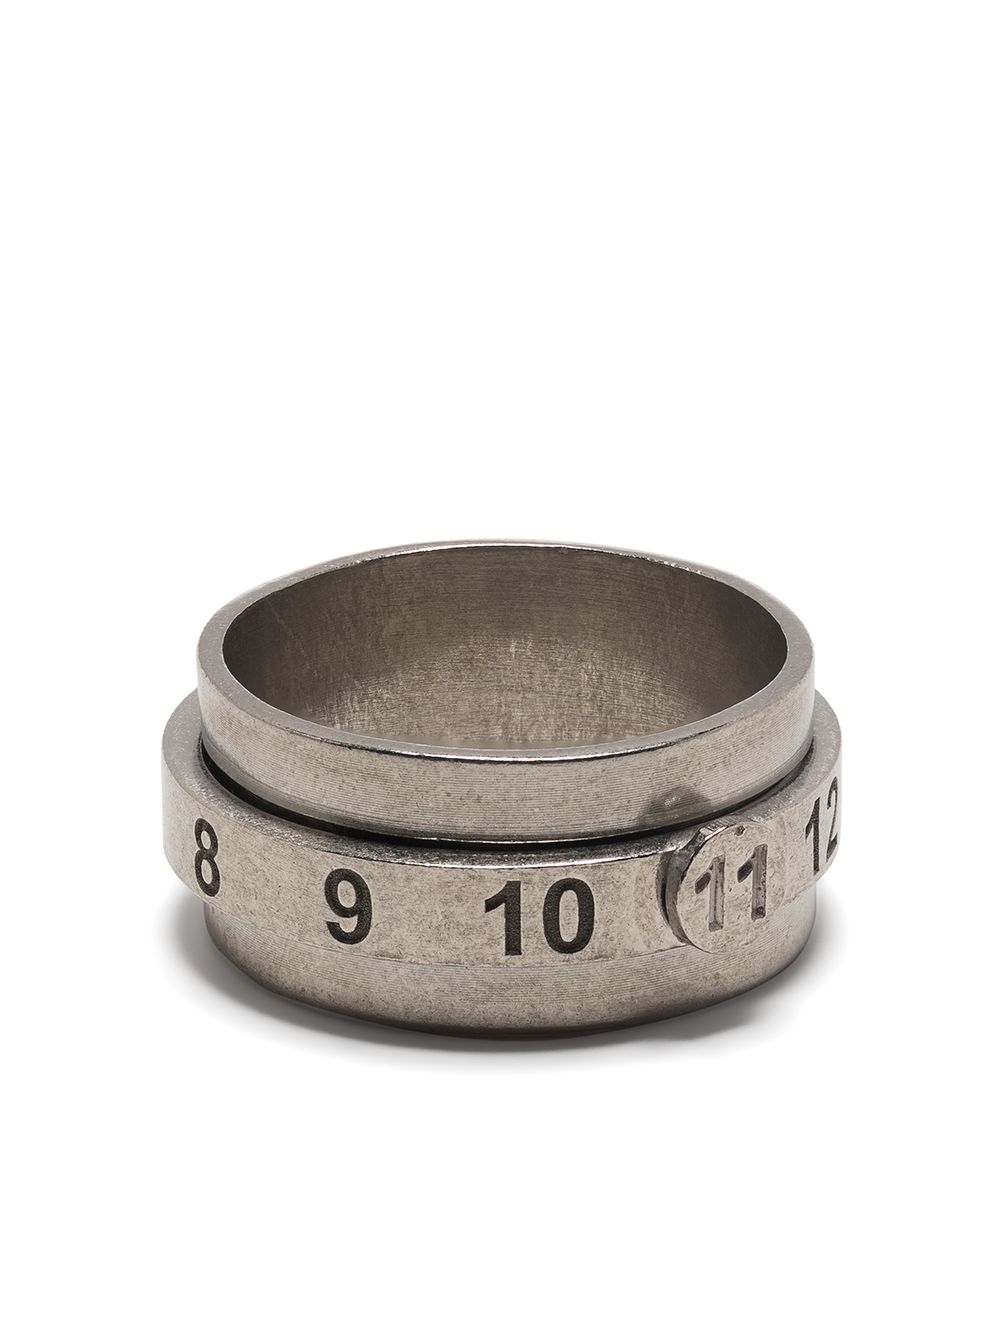 Maison Margiela Number Engraved Ring - Farfetch